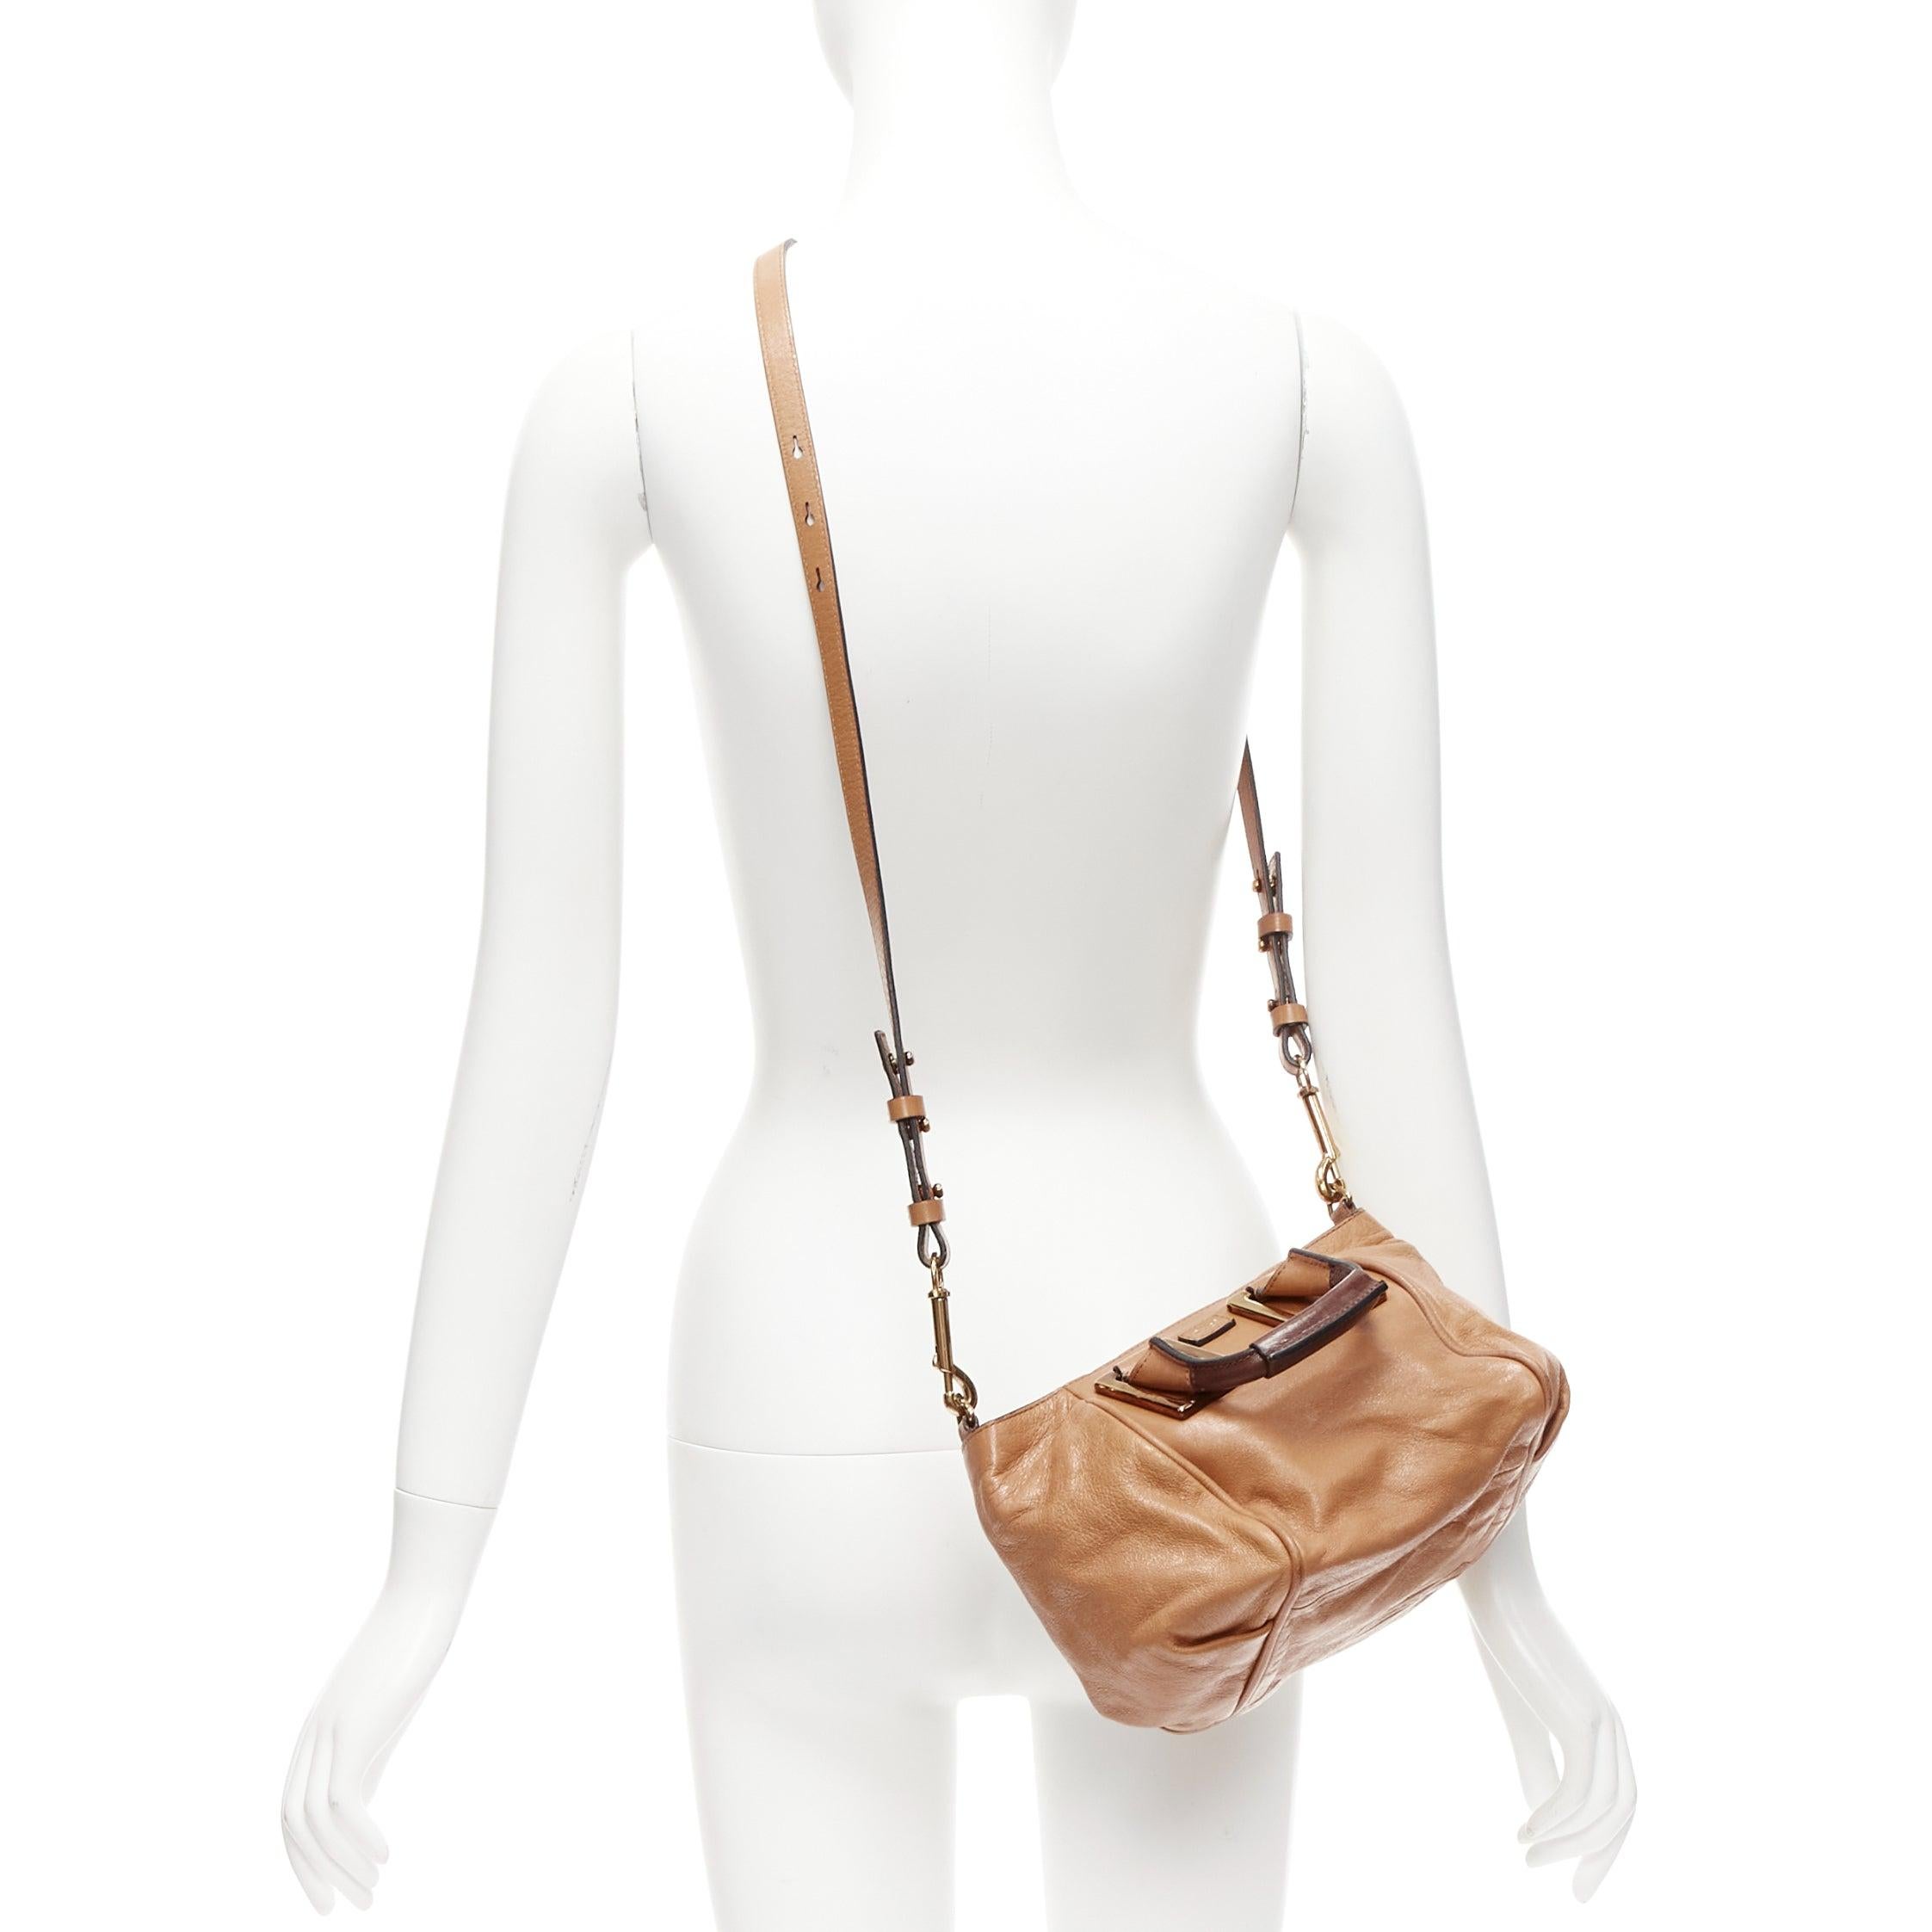 CHLOE Ethel tan smooth leather gold logo square buckles small shoulder bag
Reference: CELG/A00400
Brand: Chloe
Model: Ethel
Material: Leather, Metal
Color: Tan Brown, Gold
Pattern: Solid
Closure: Zip
Lining: Black Fabric
Extra Details: Similar front